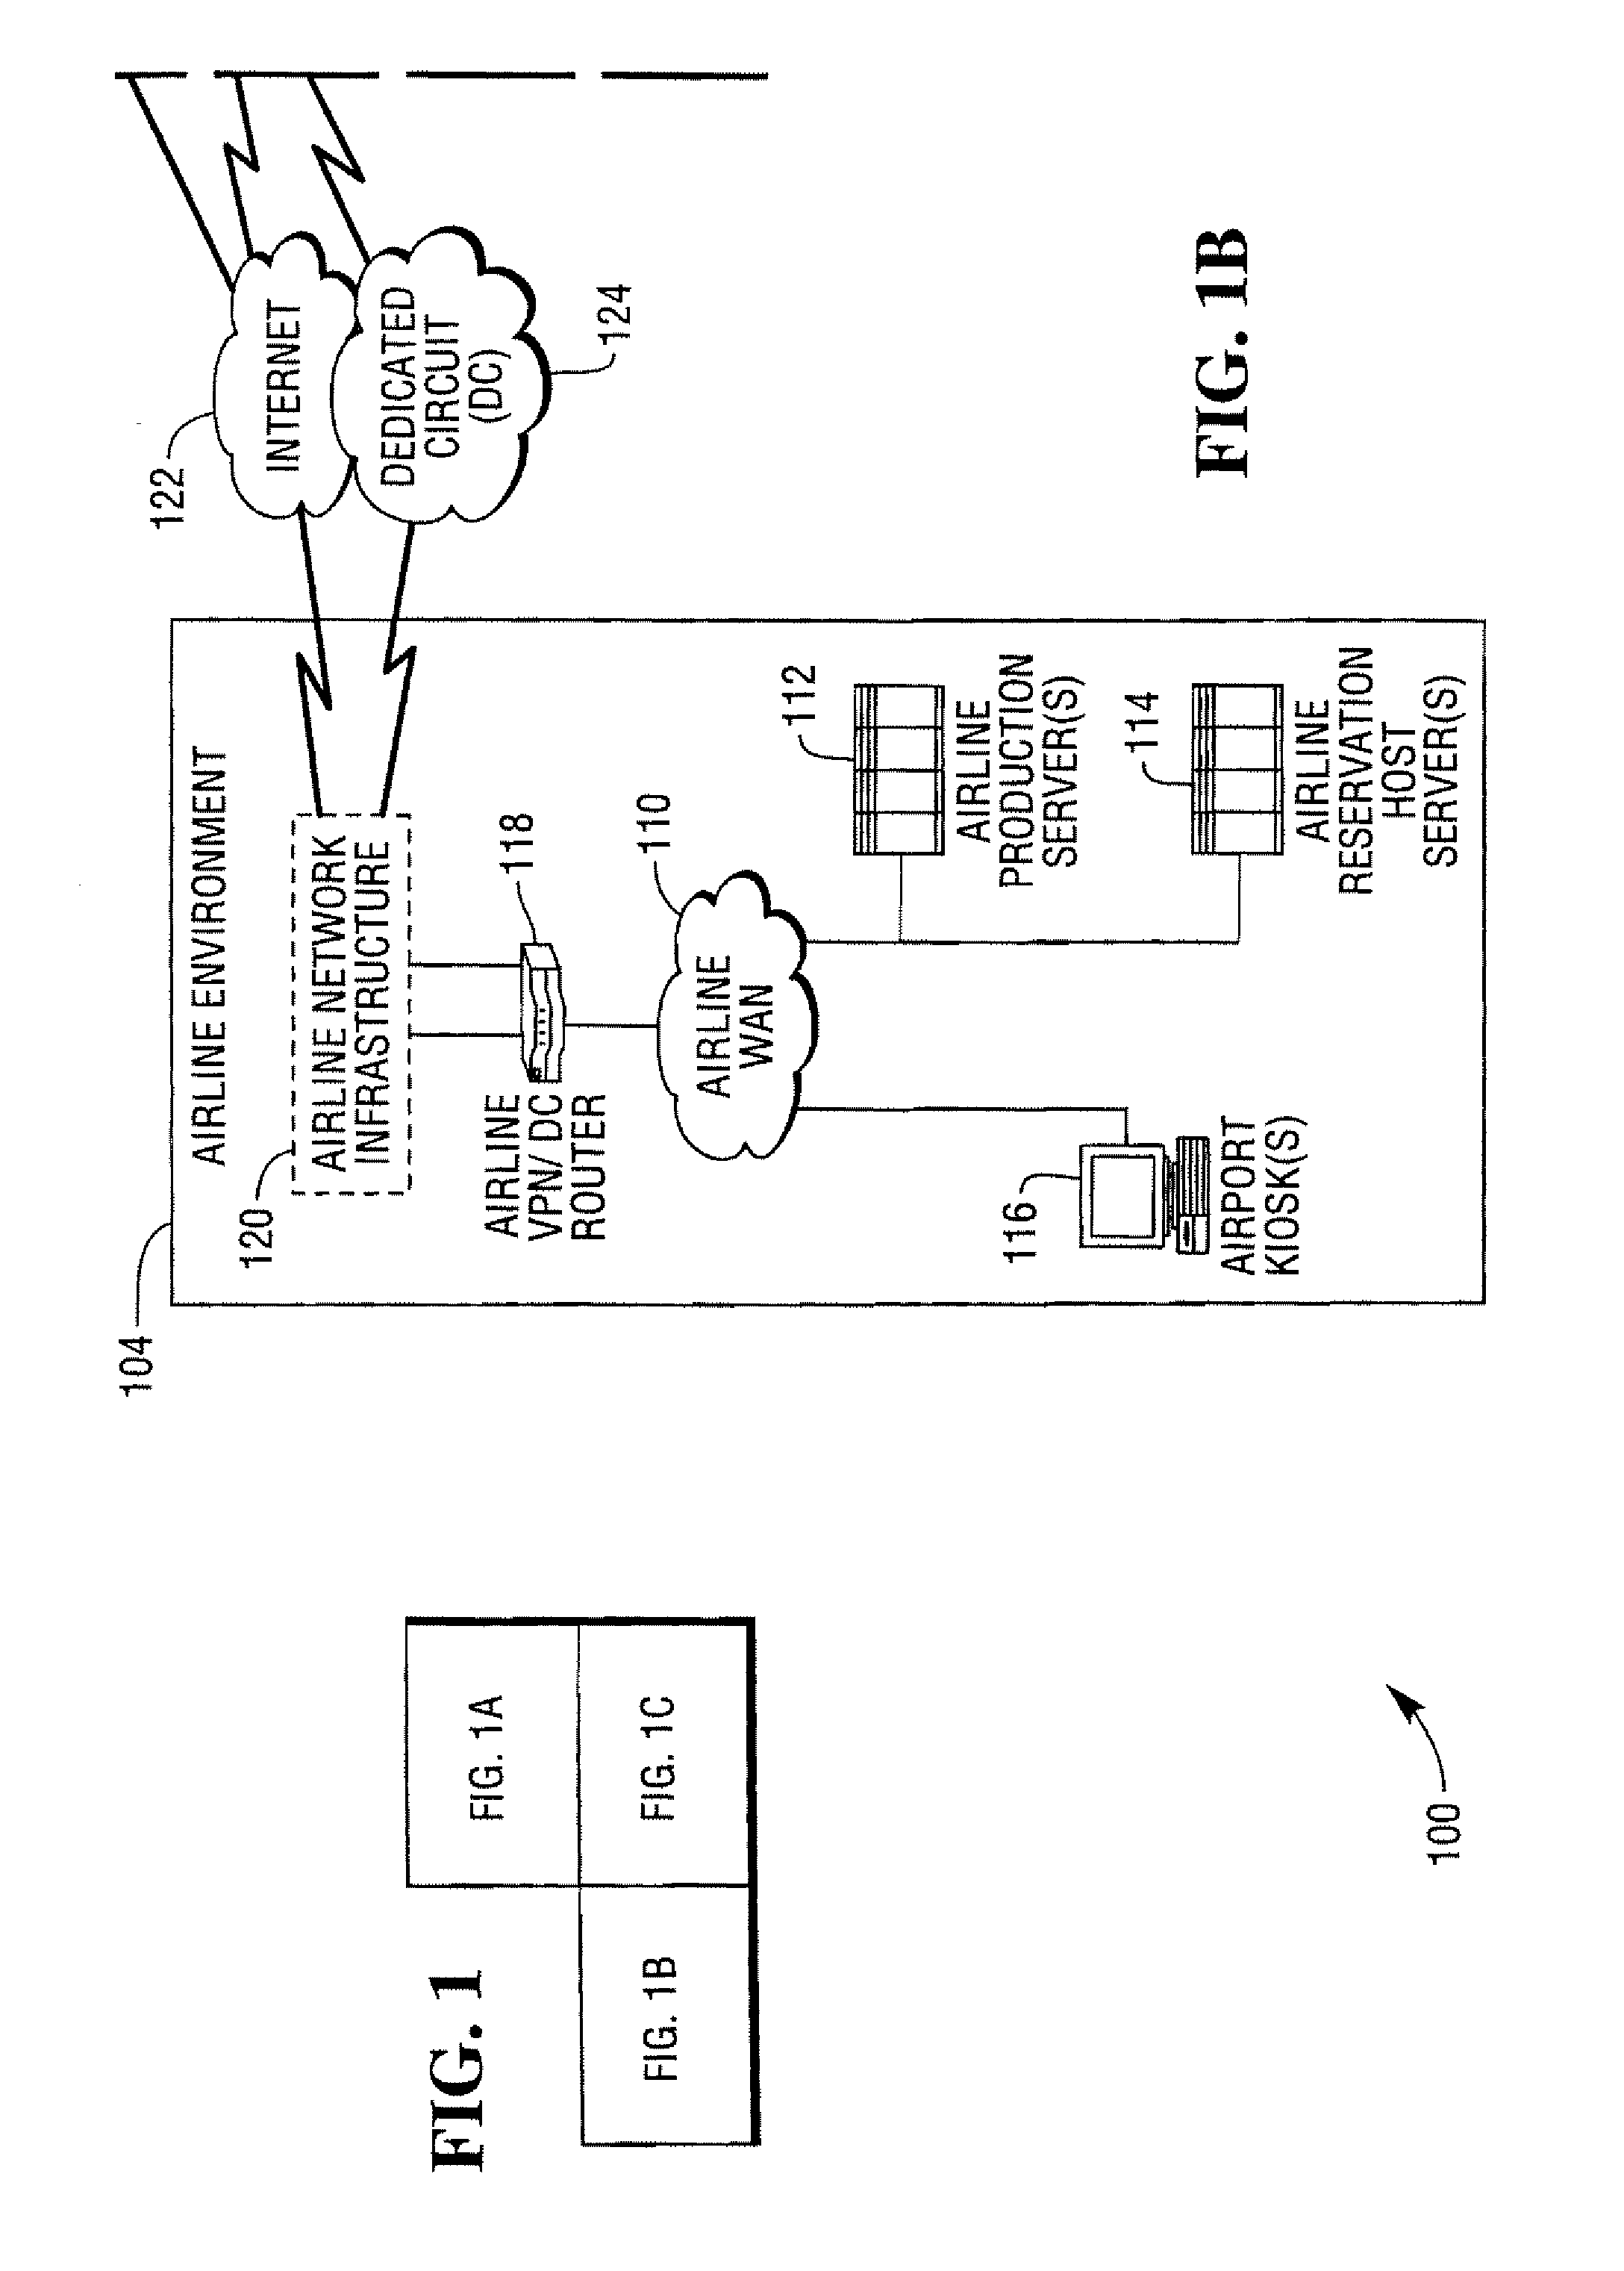 Remote Self Service Facilities Administration System